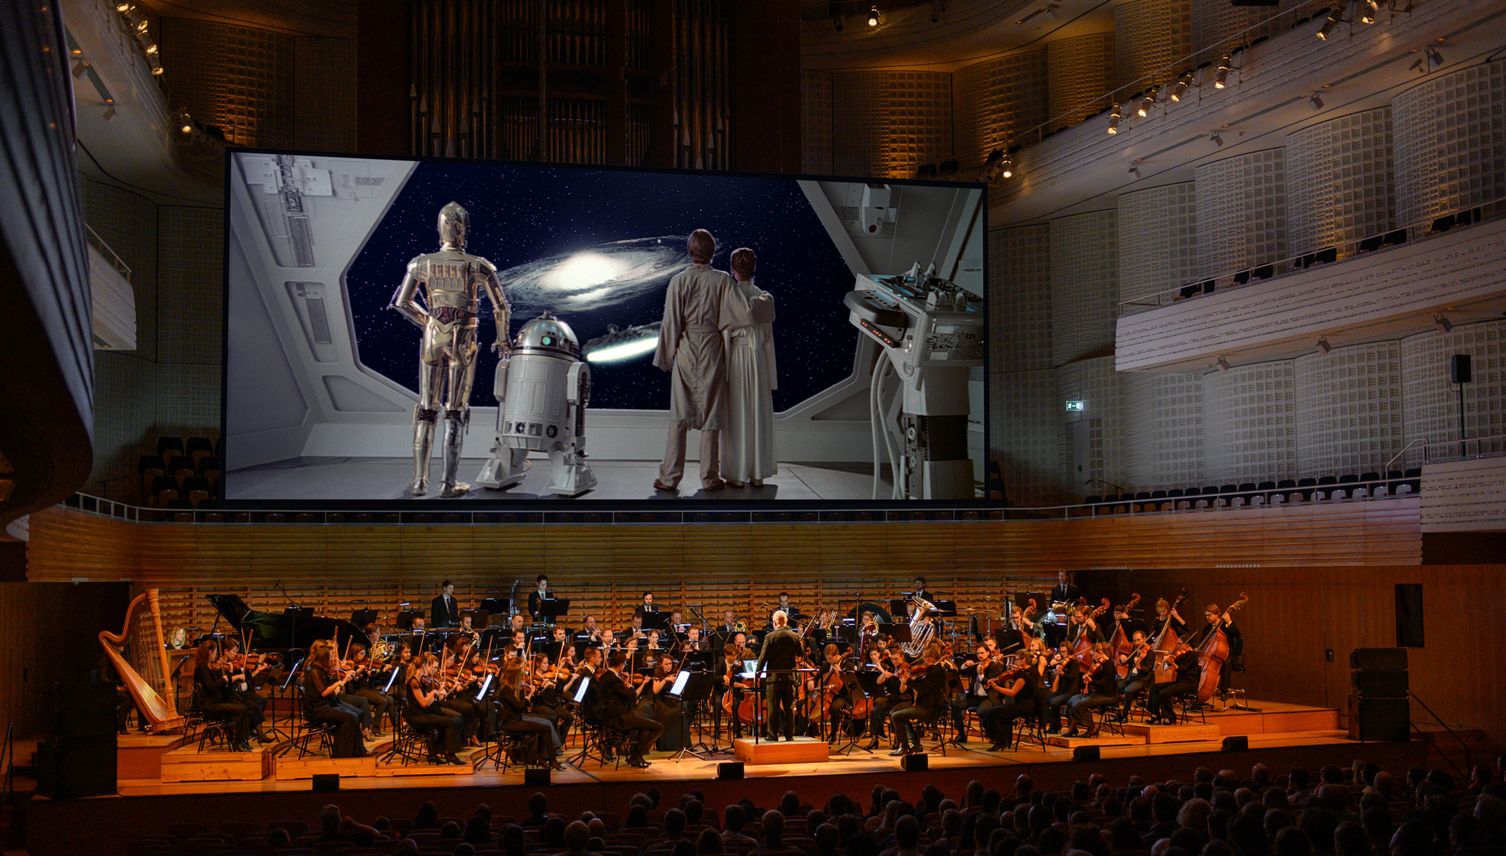 Star Wars in Concert: The Empire Strikes Back